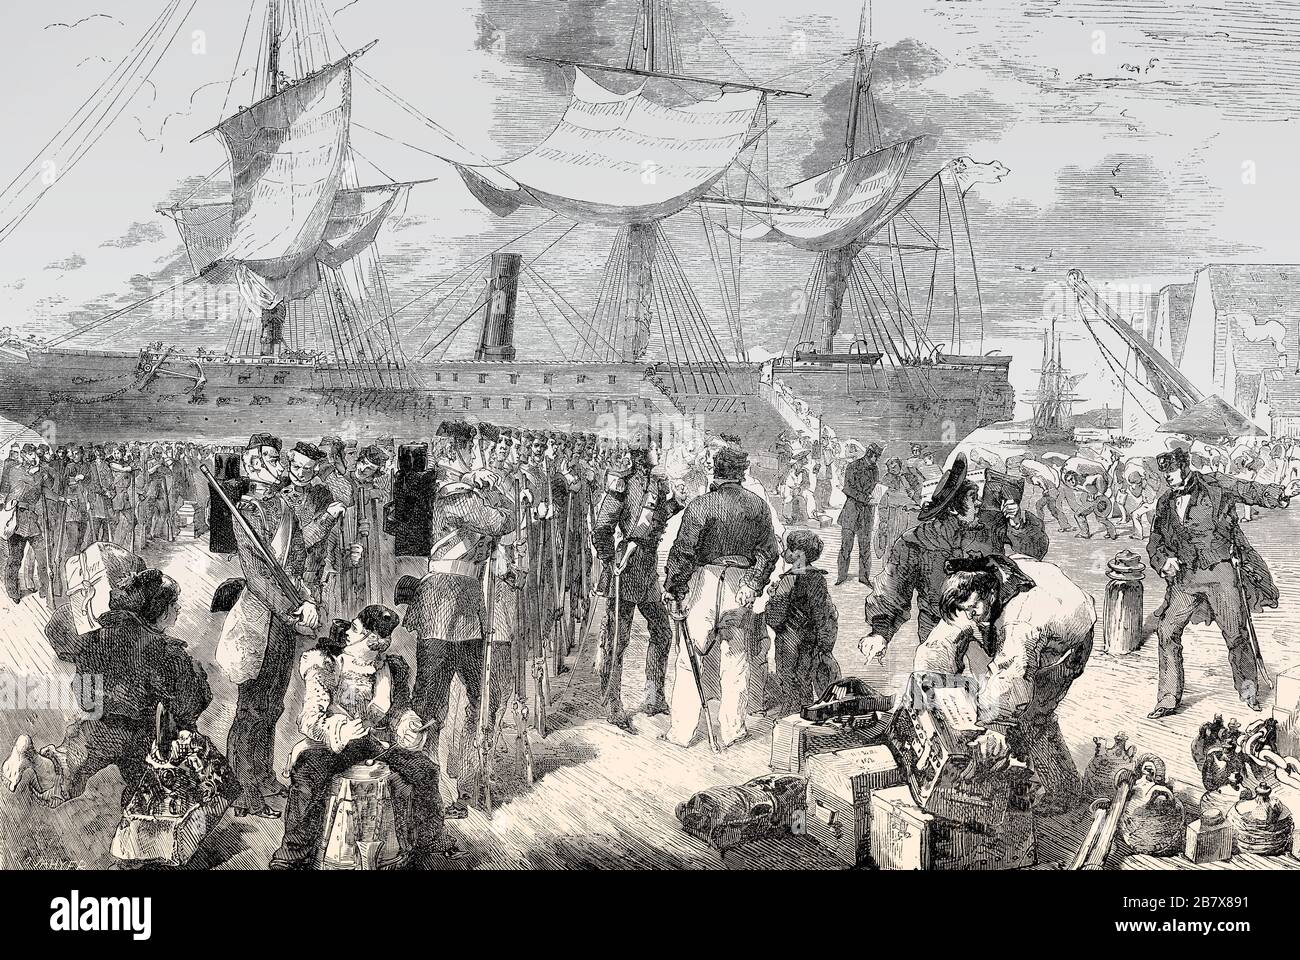 Embarkation of the soldiers in Portsmouth, Hampshire, England, Indian Rebellion of 1857 Stock Photo